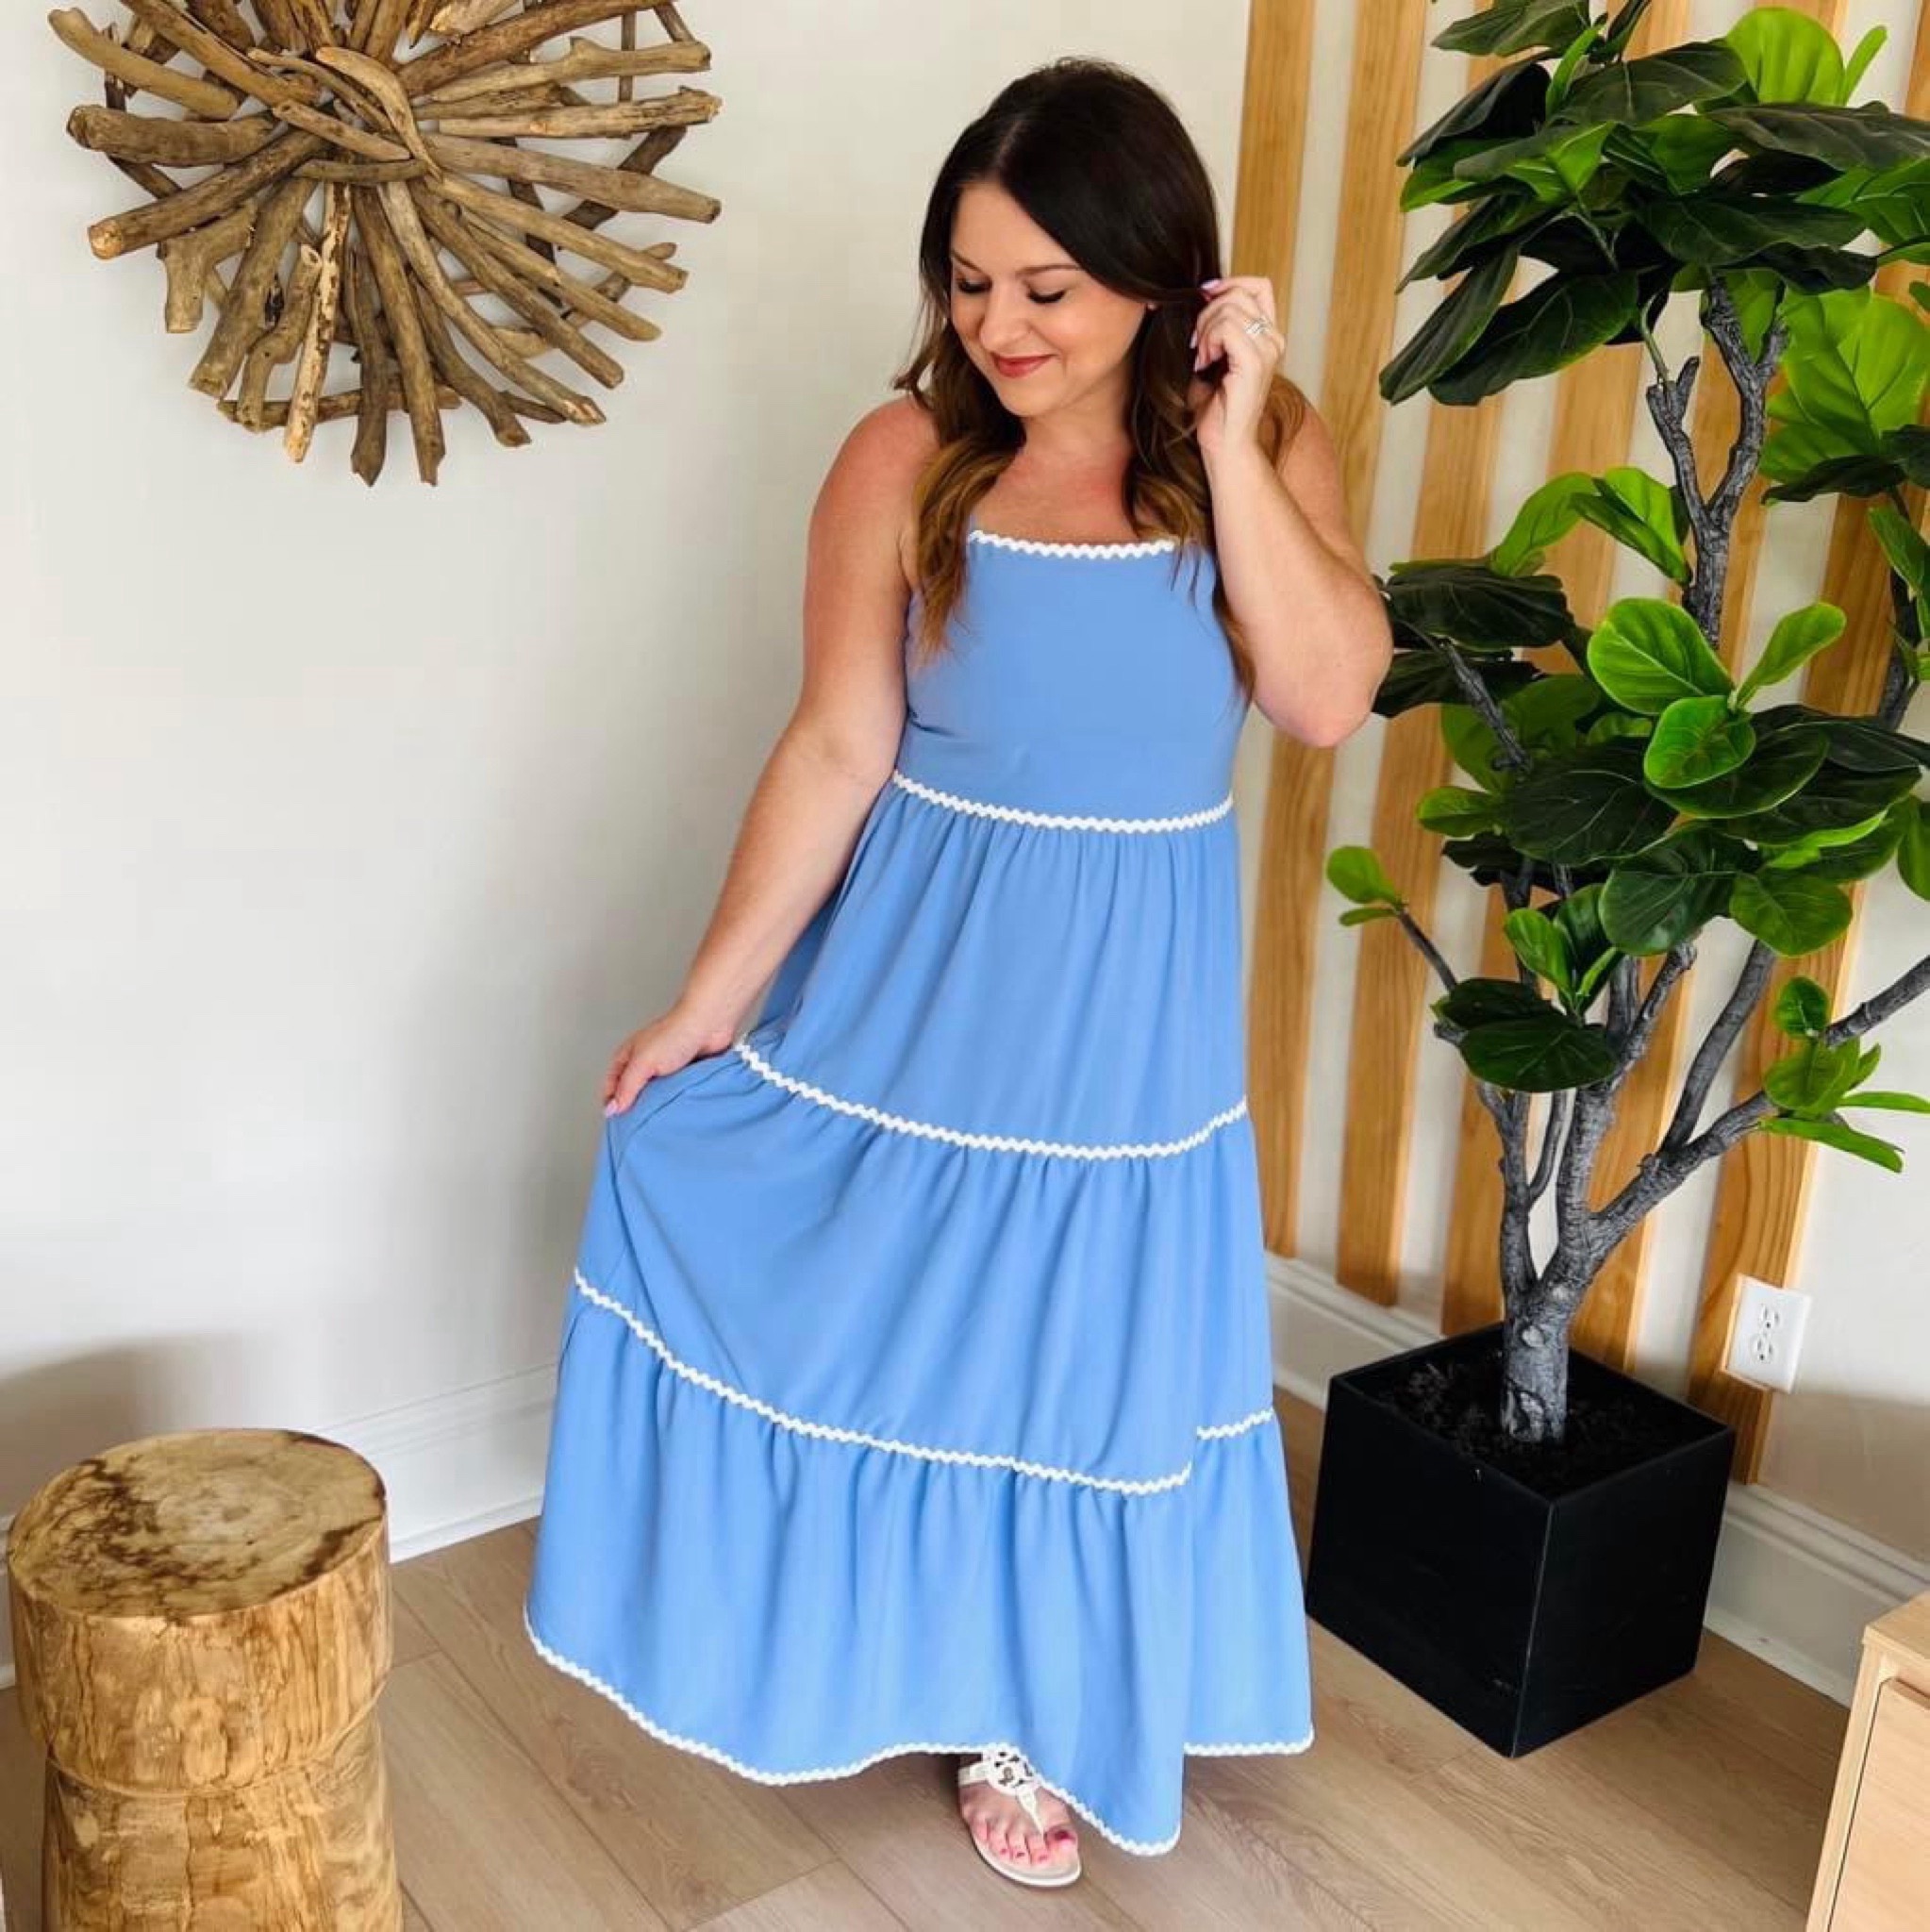 Chic & Comfortable: Spring Fashion for Teachers

spring, spring fashion, spring outfit, maxi dress, casual dress, casual outfit, women's dresses